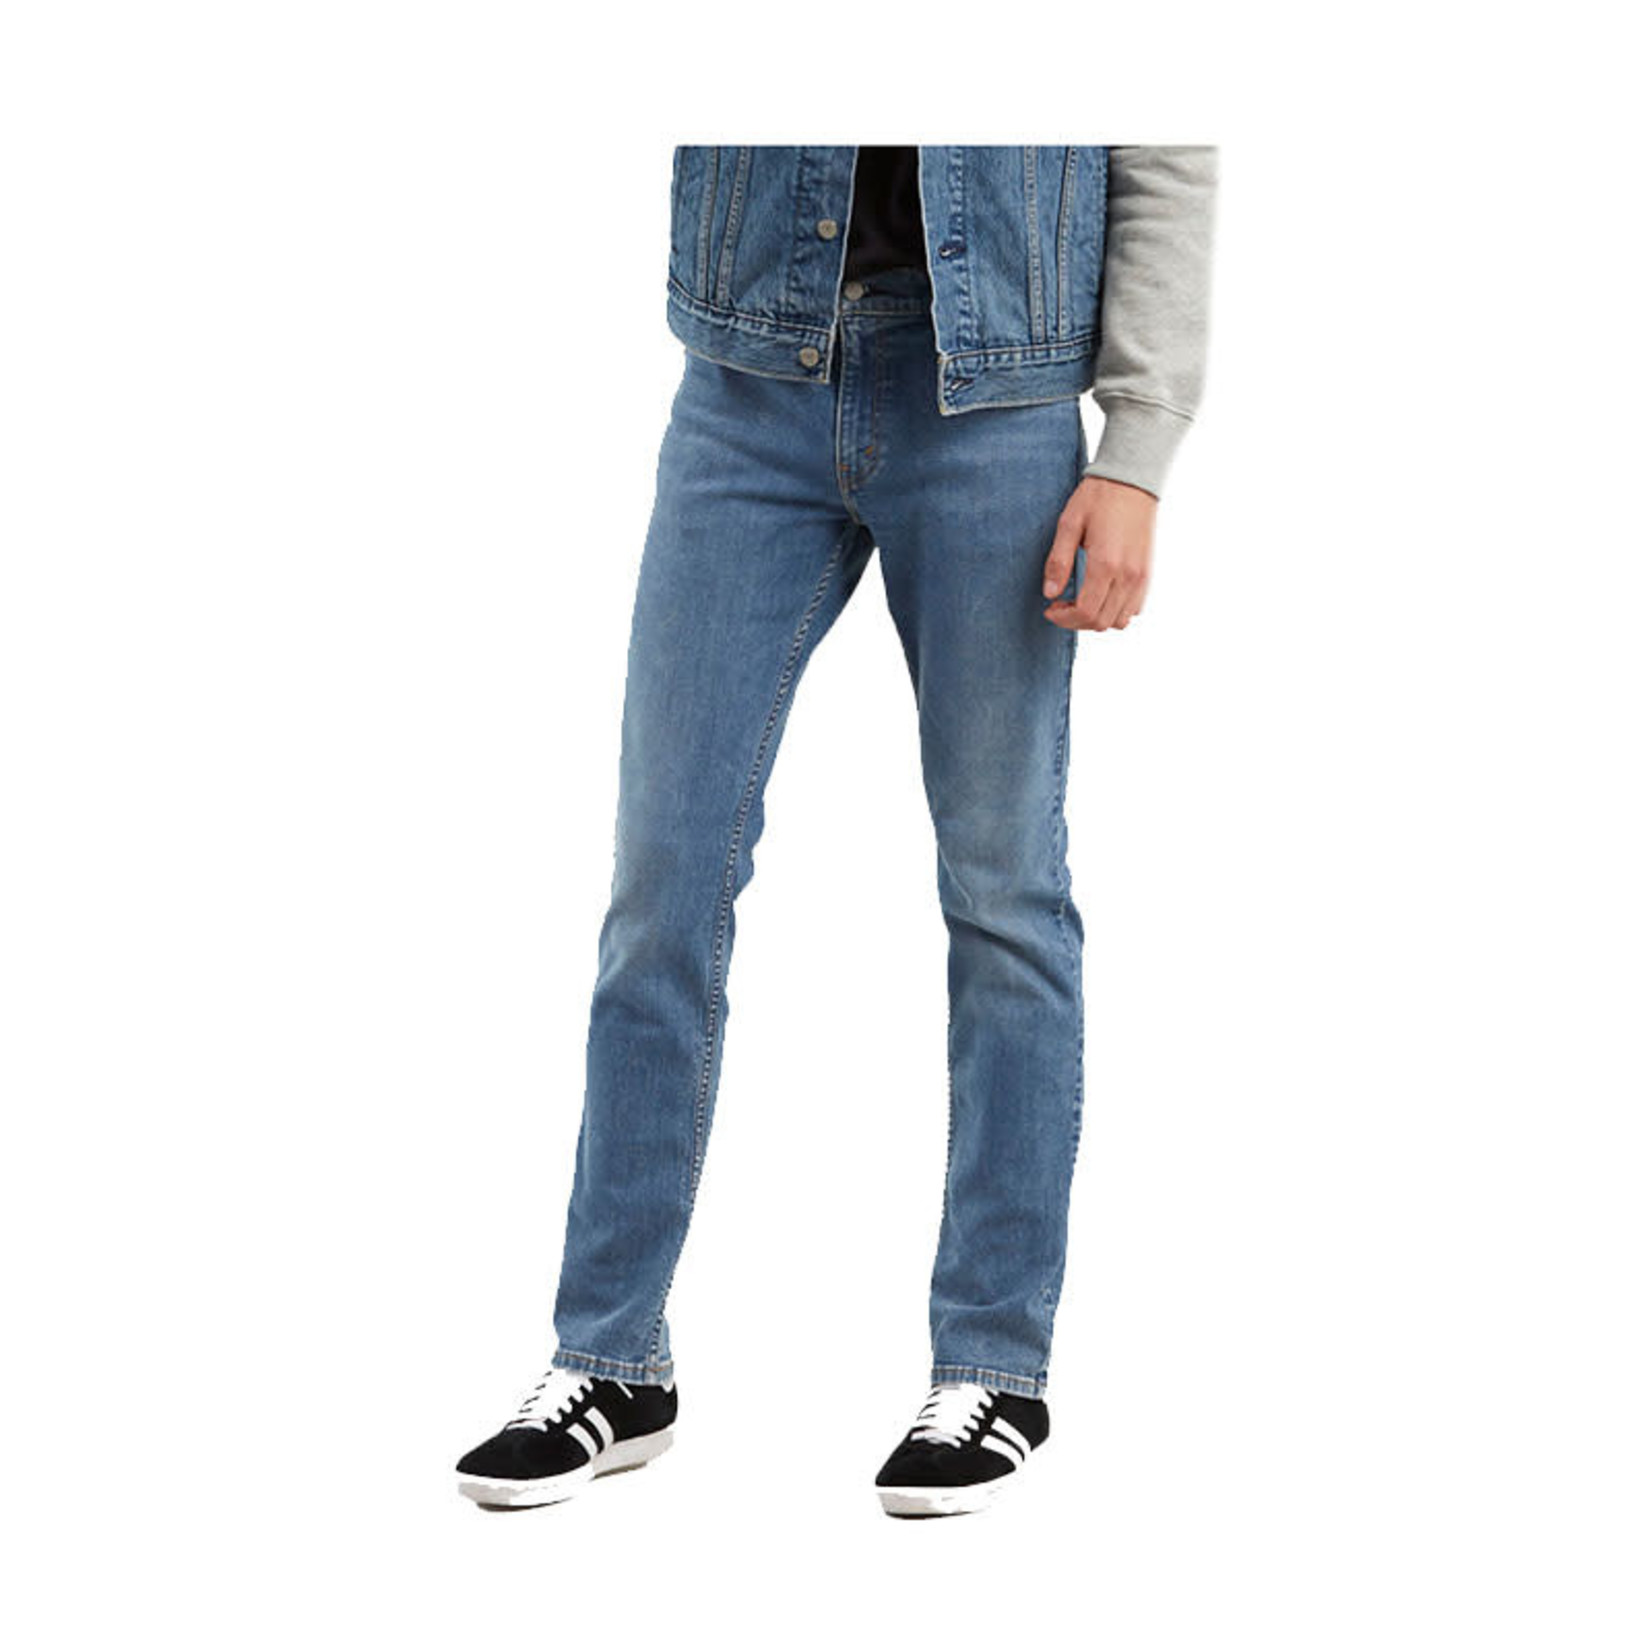 LEVIS 511 SLIM FIT 04511-3621 - Michael's and Jody's